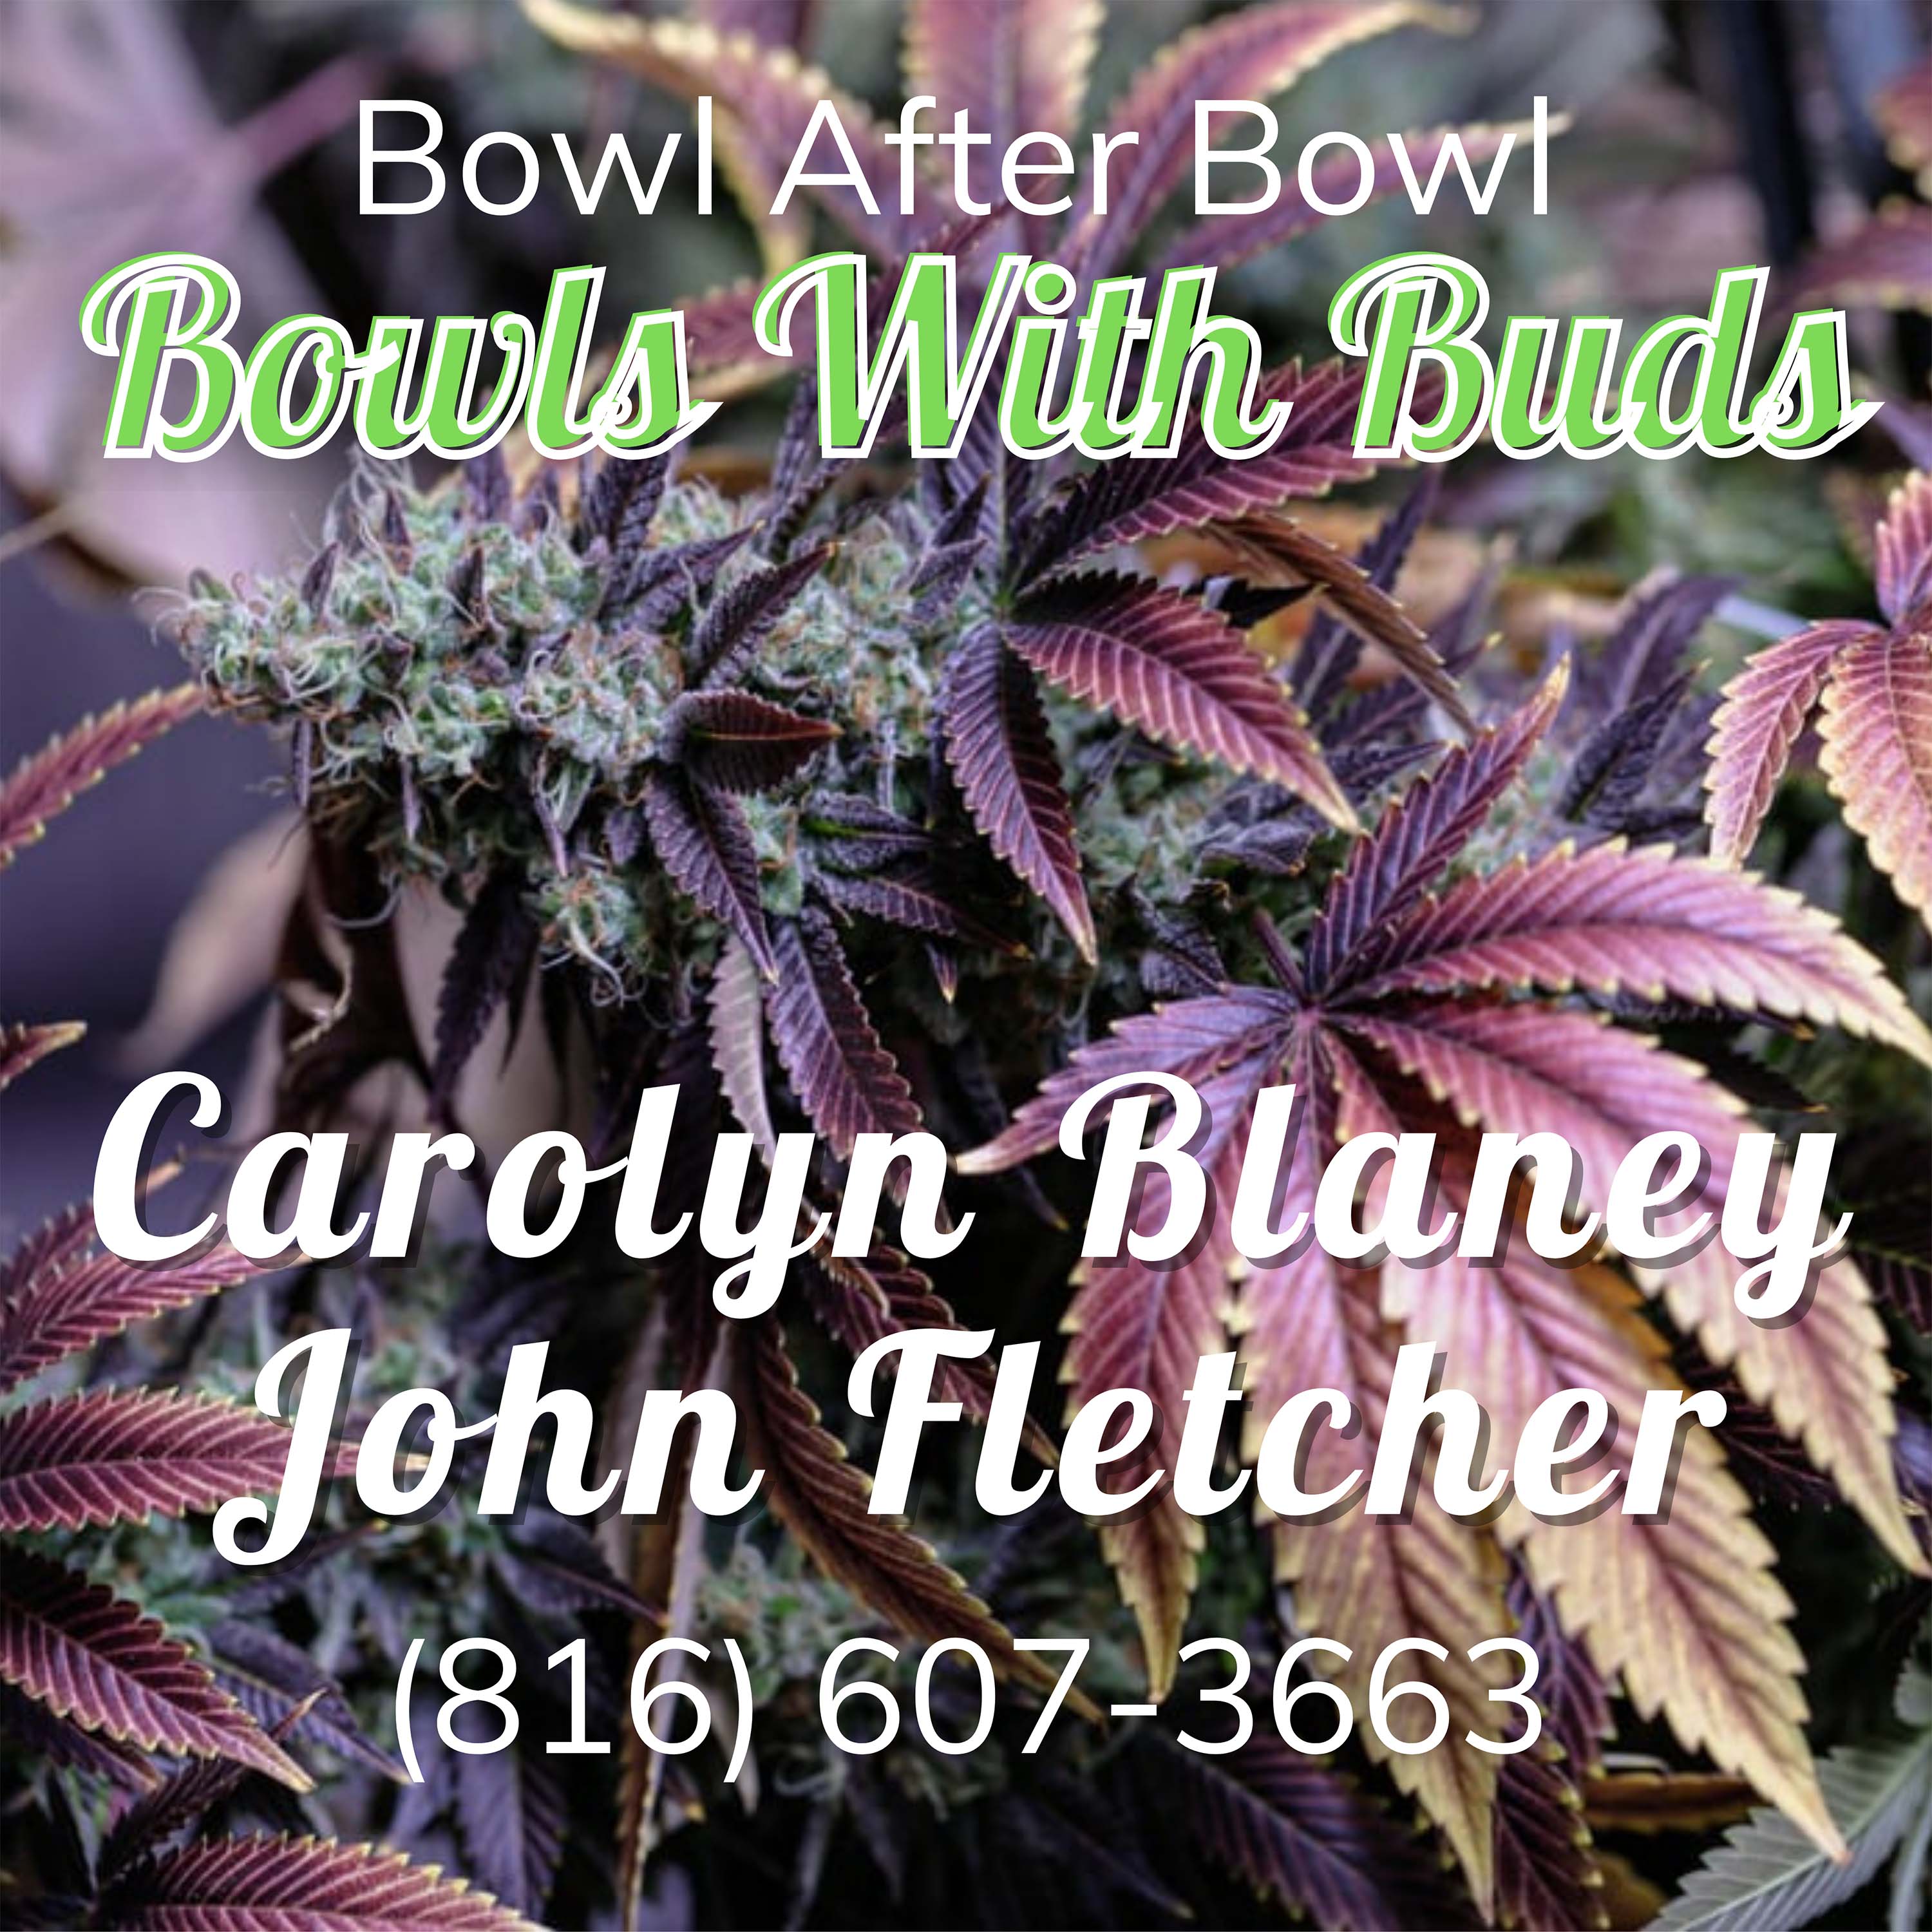 Episode 146 ★ Bowls With Buds ★ Carolyn Blaney and John Fletcher